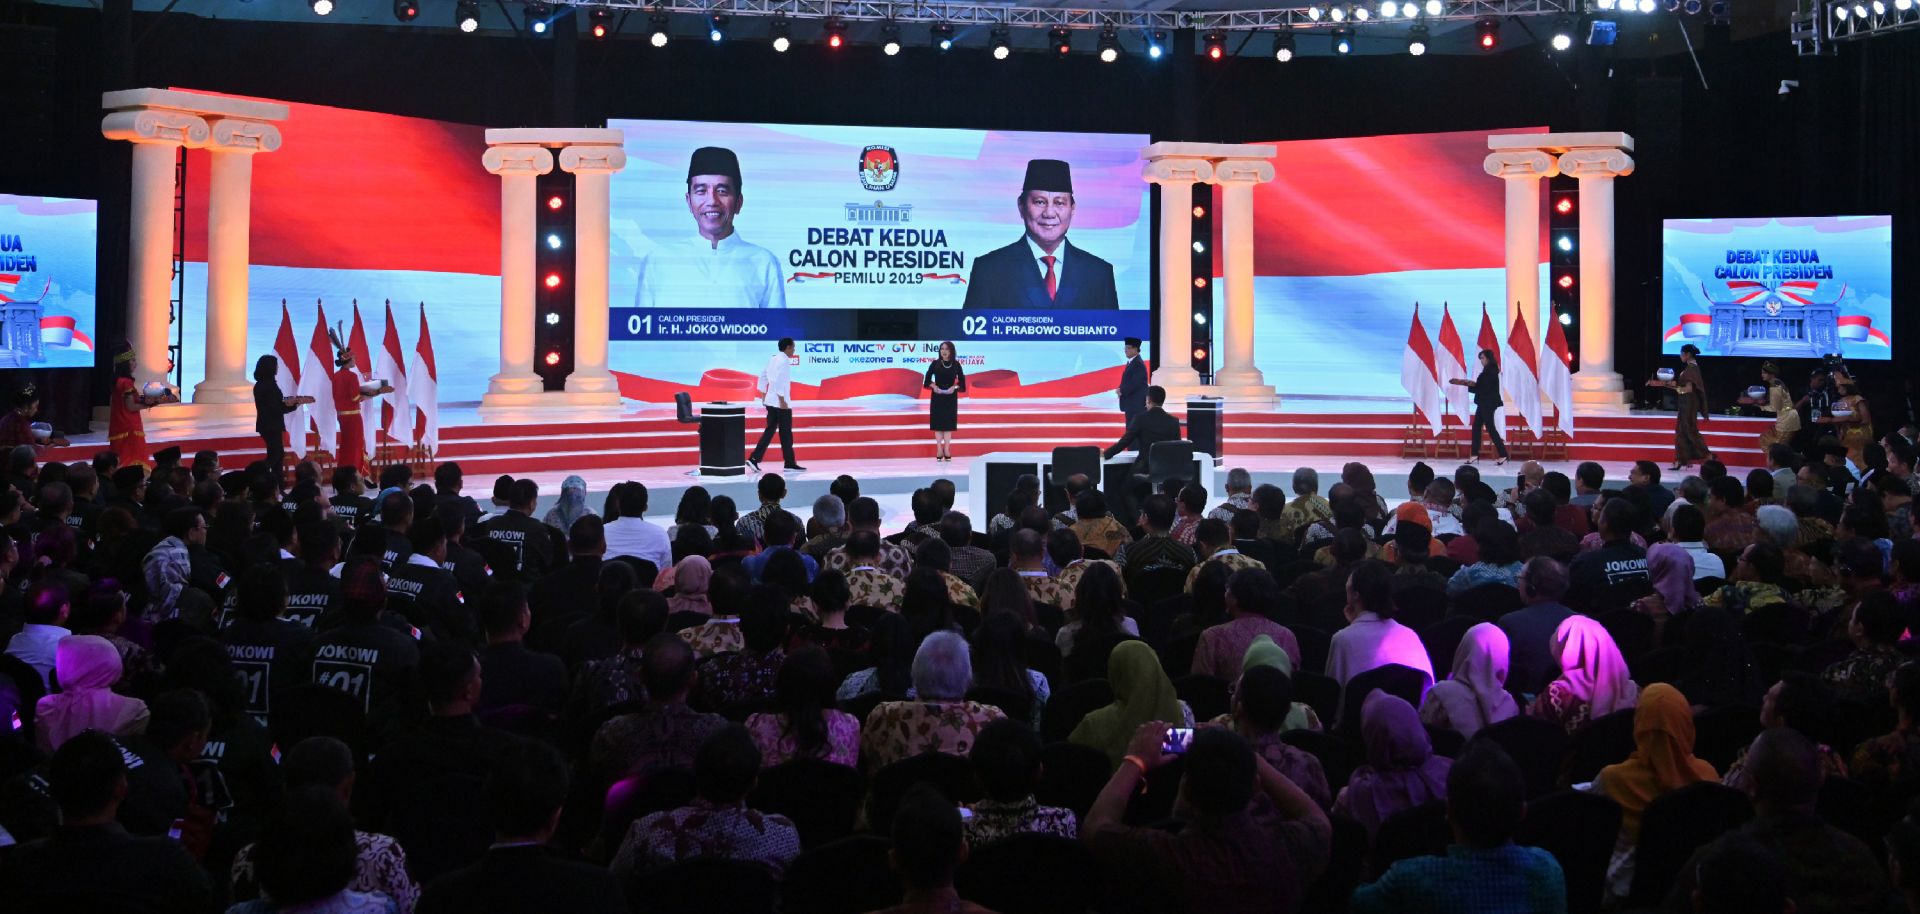 An audience watches the second presidential debate between Indonesian incumbent President Joko Widodo and candidate for president Prabowo Subianto in Jakarta on Feb. 17, 2019.